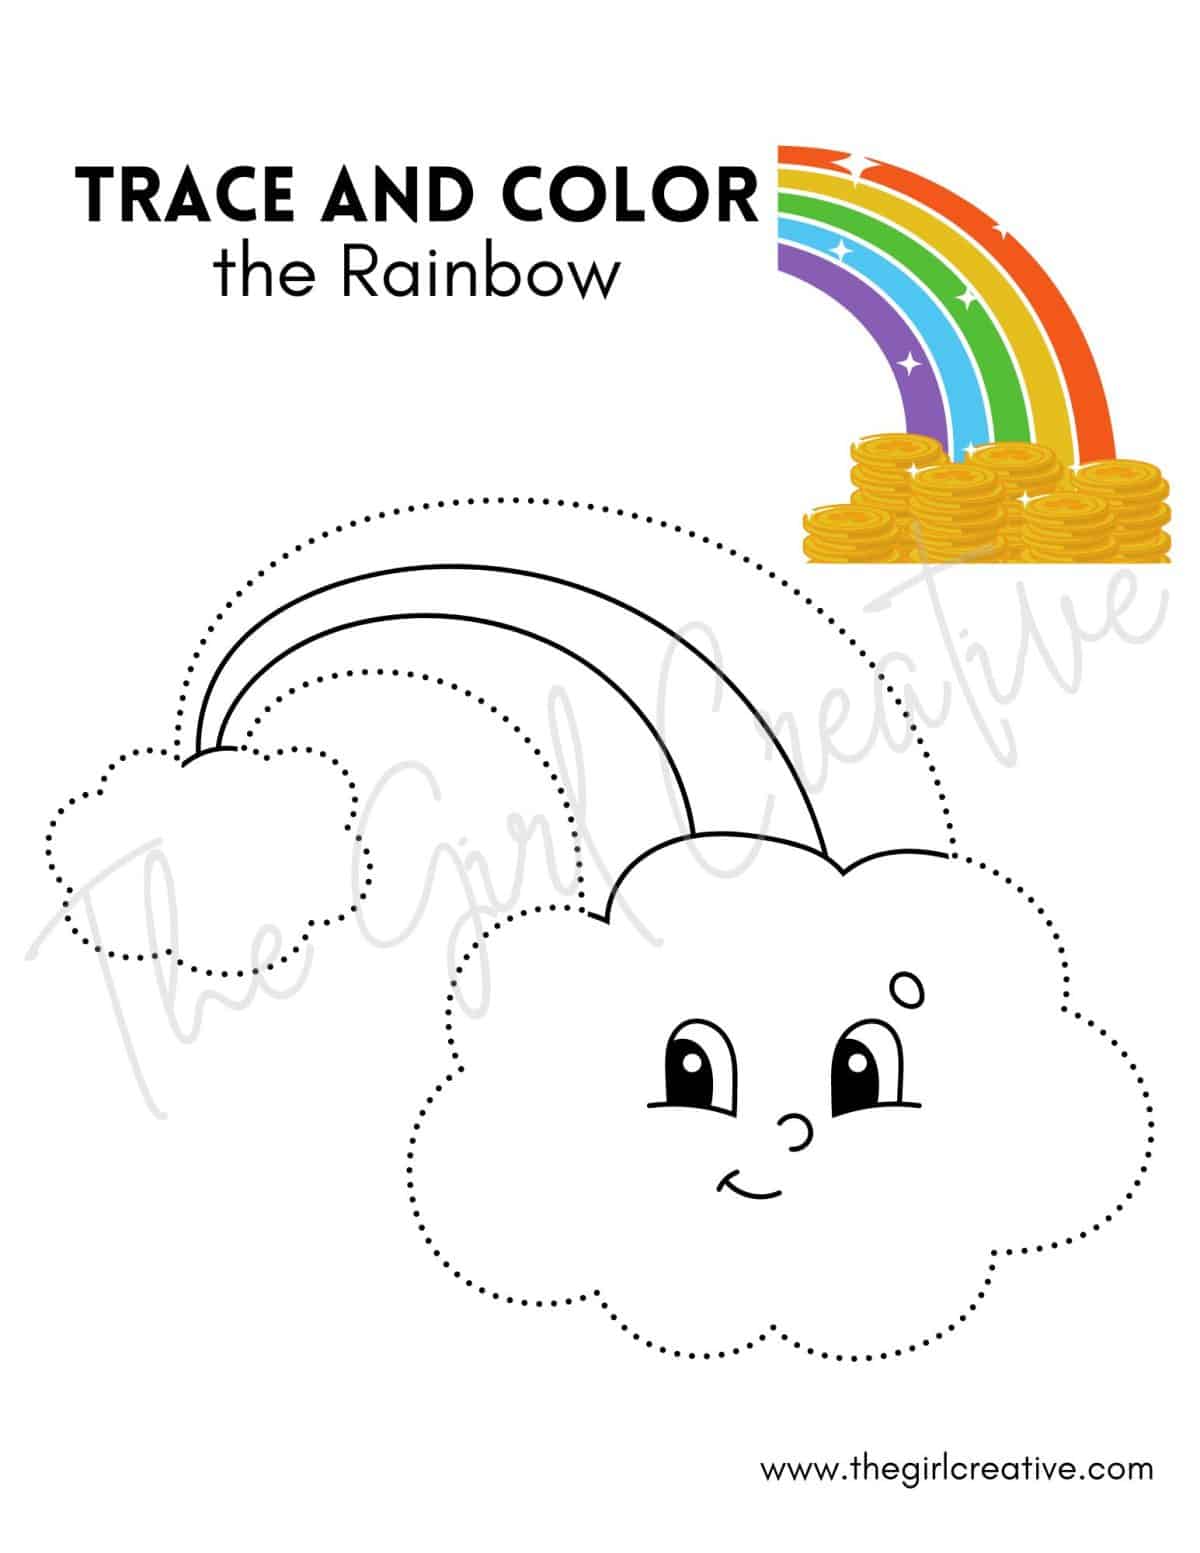 Rainbow coloring page for St. Patrick's Day